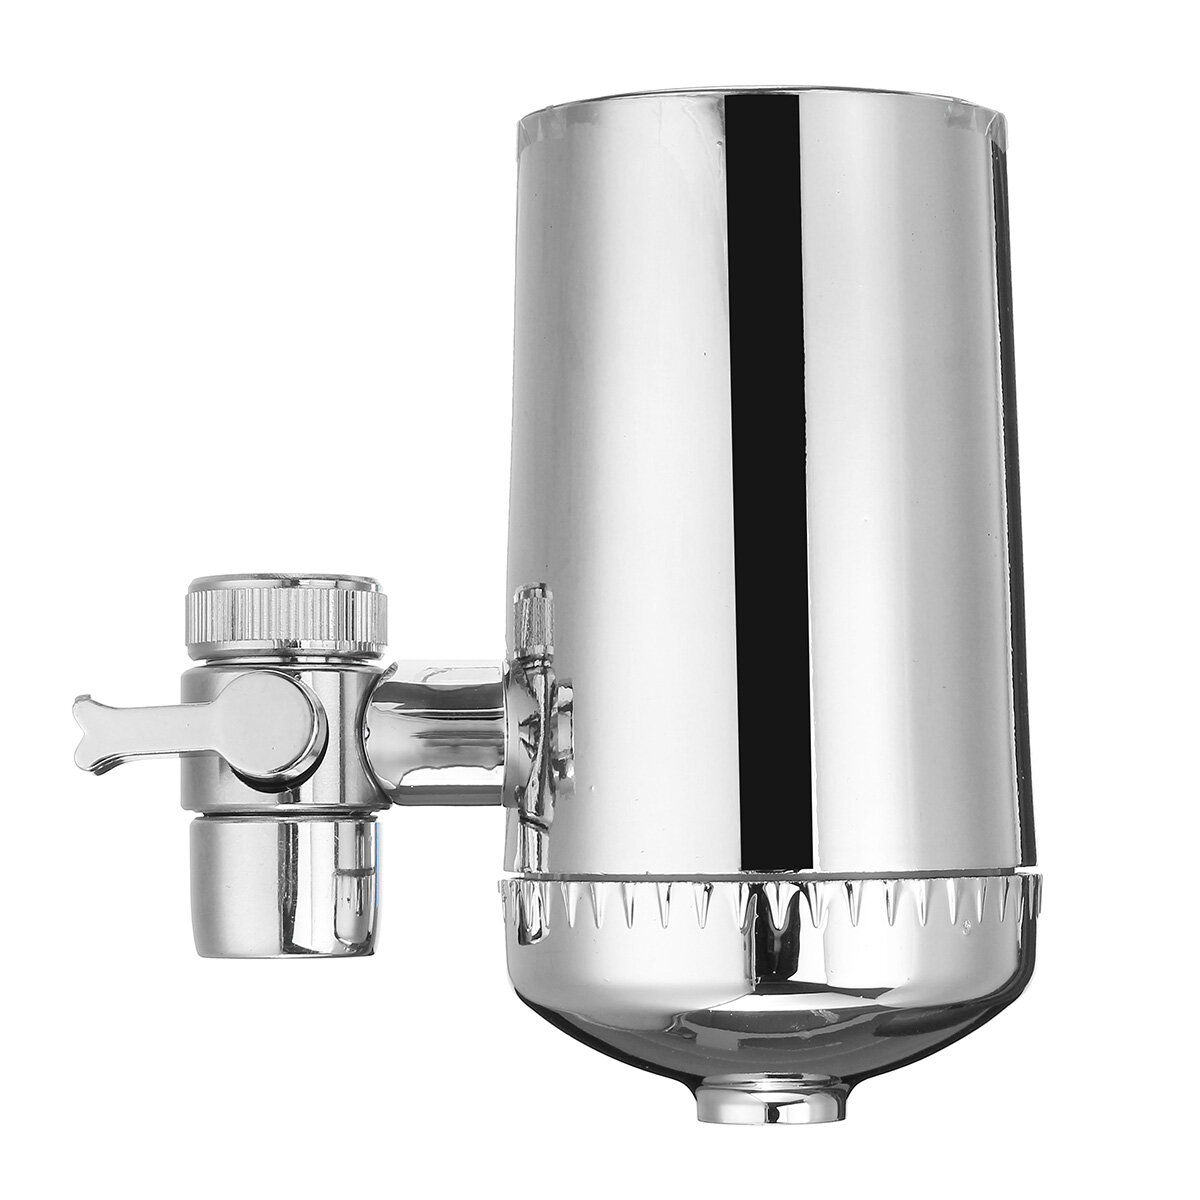 

Kitchen Tap Water Filter Purifier Household Faucet Ceramic Filter Prefiltration Accessories